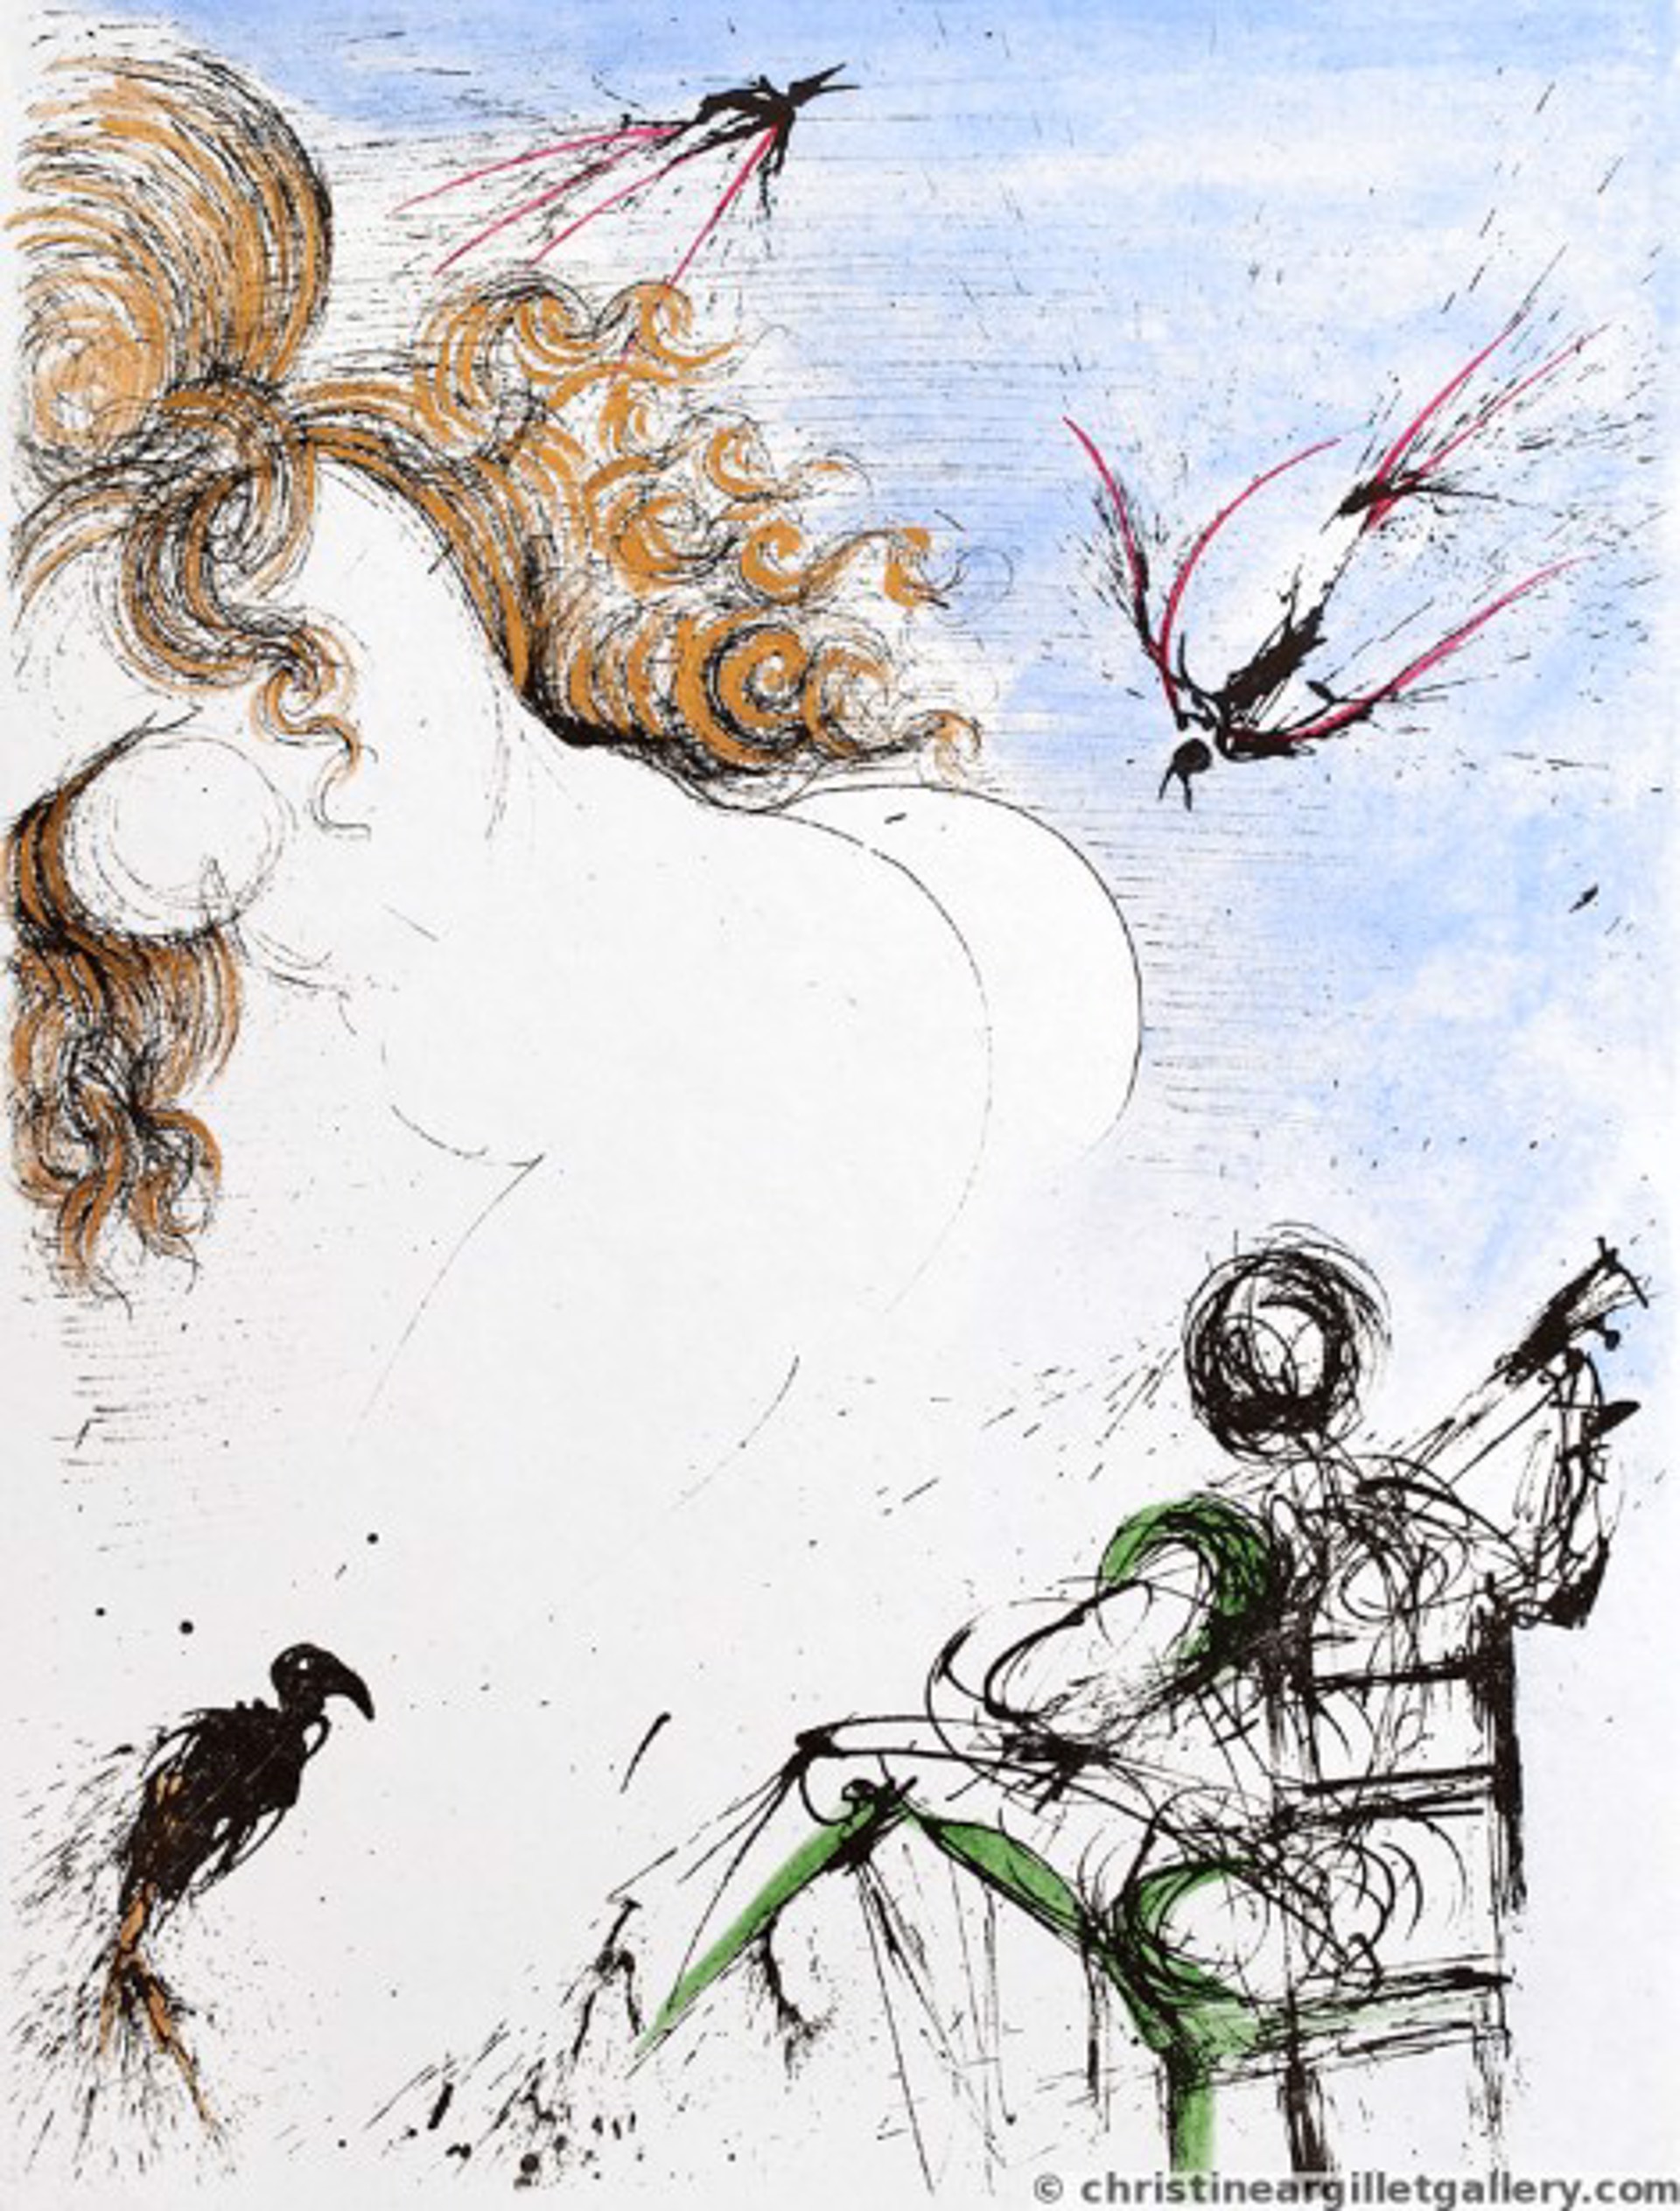 Apollinaire "Woman with Parrot" by Salvador Dali